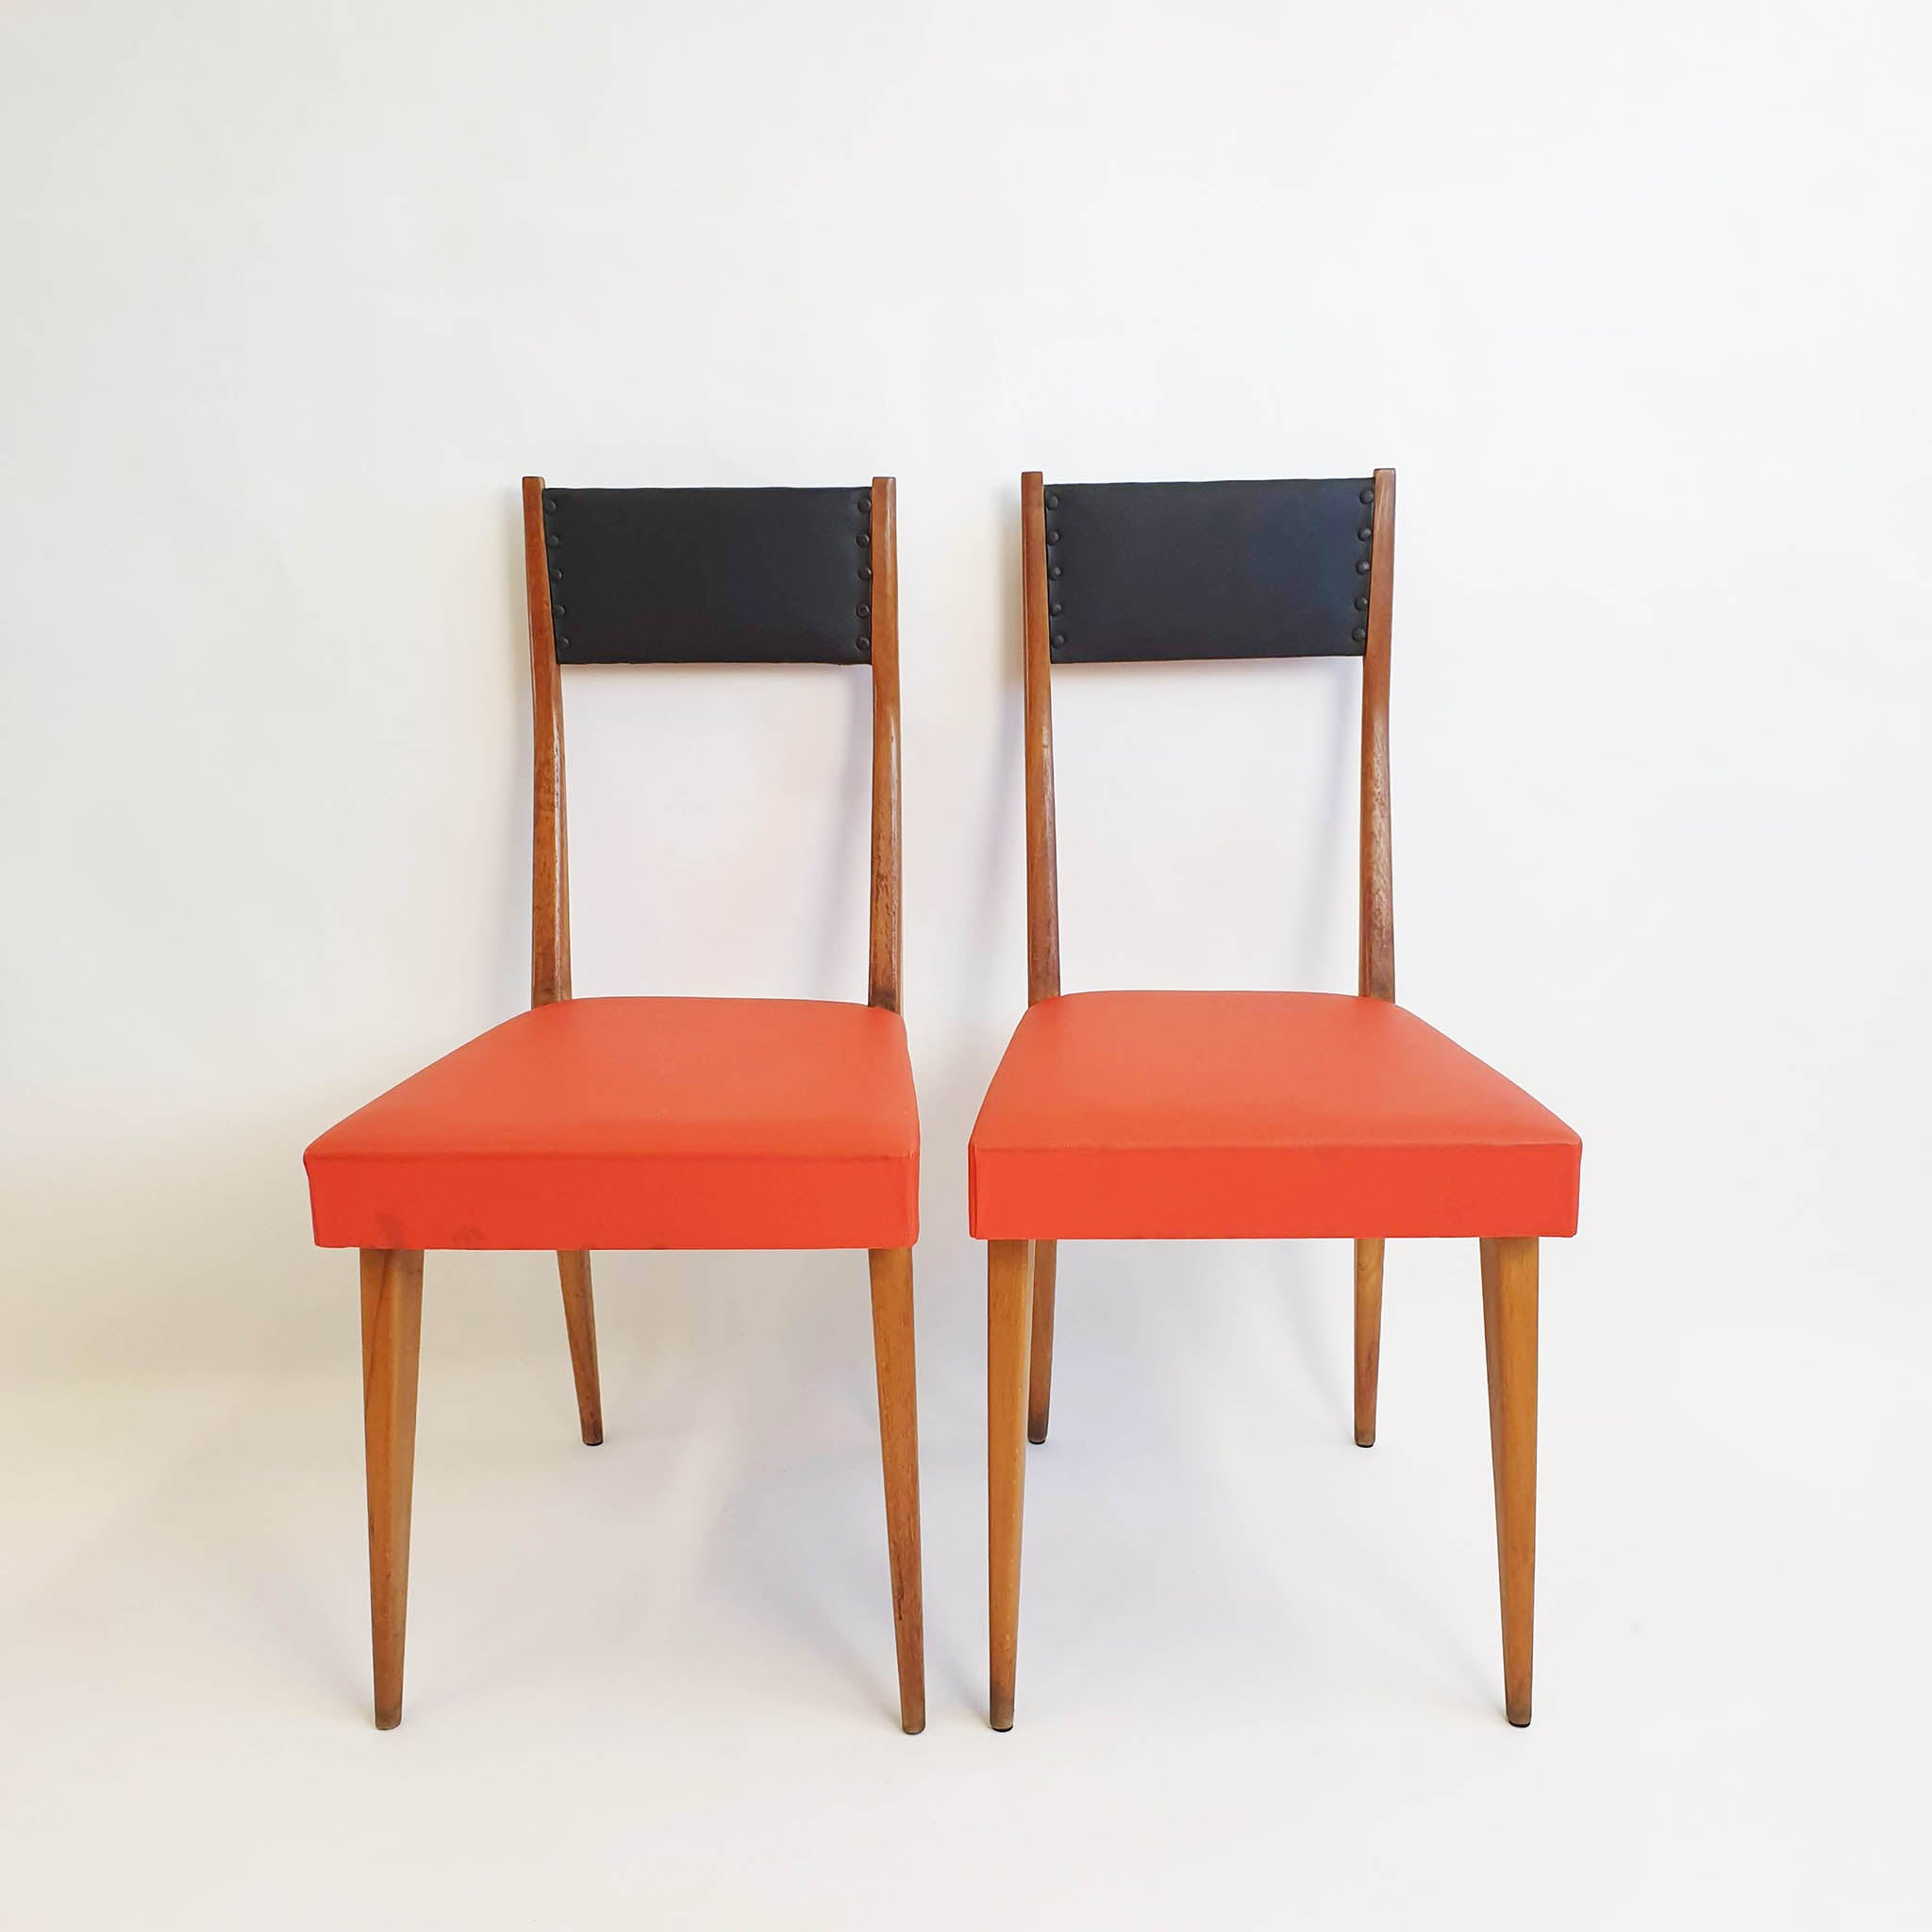 1950s Italian chairs (2 available)